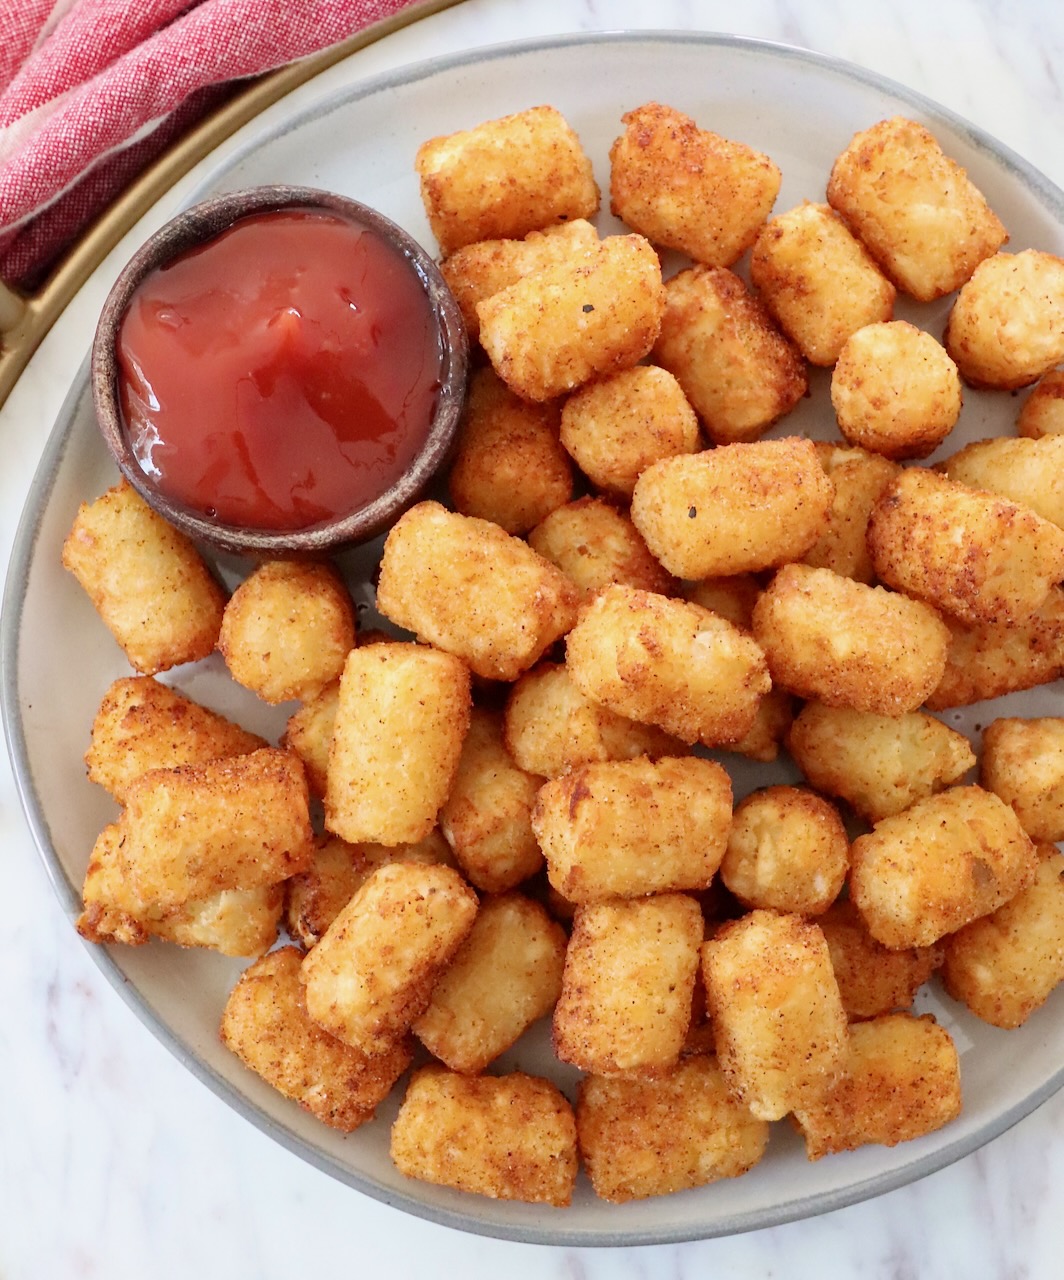 cooked seasoned tater tots on plate with small bowl of ketchup